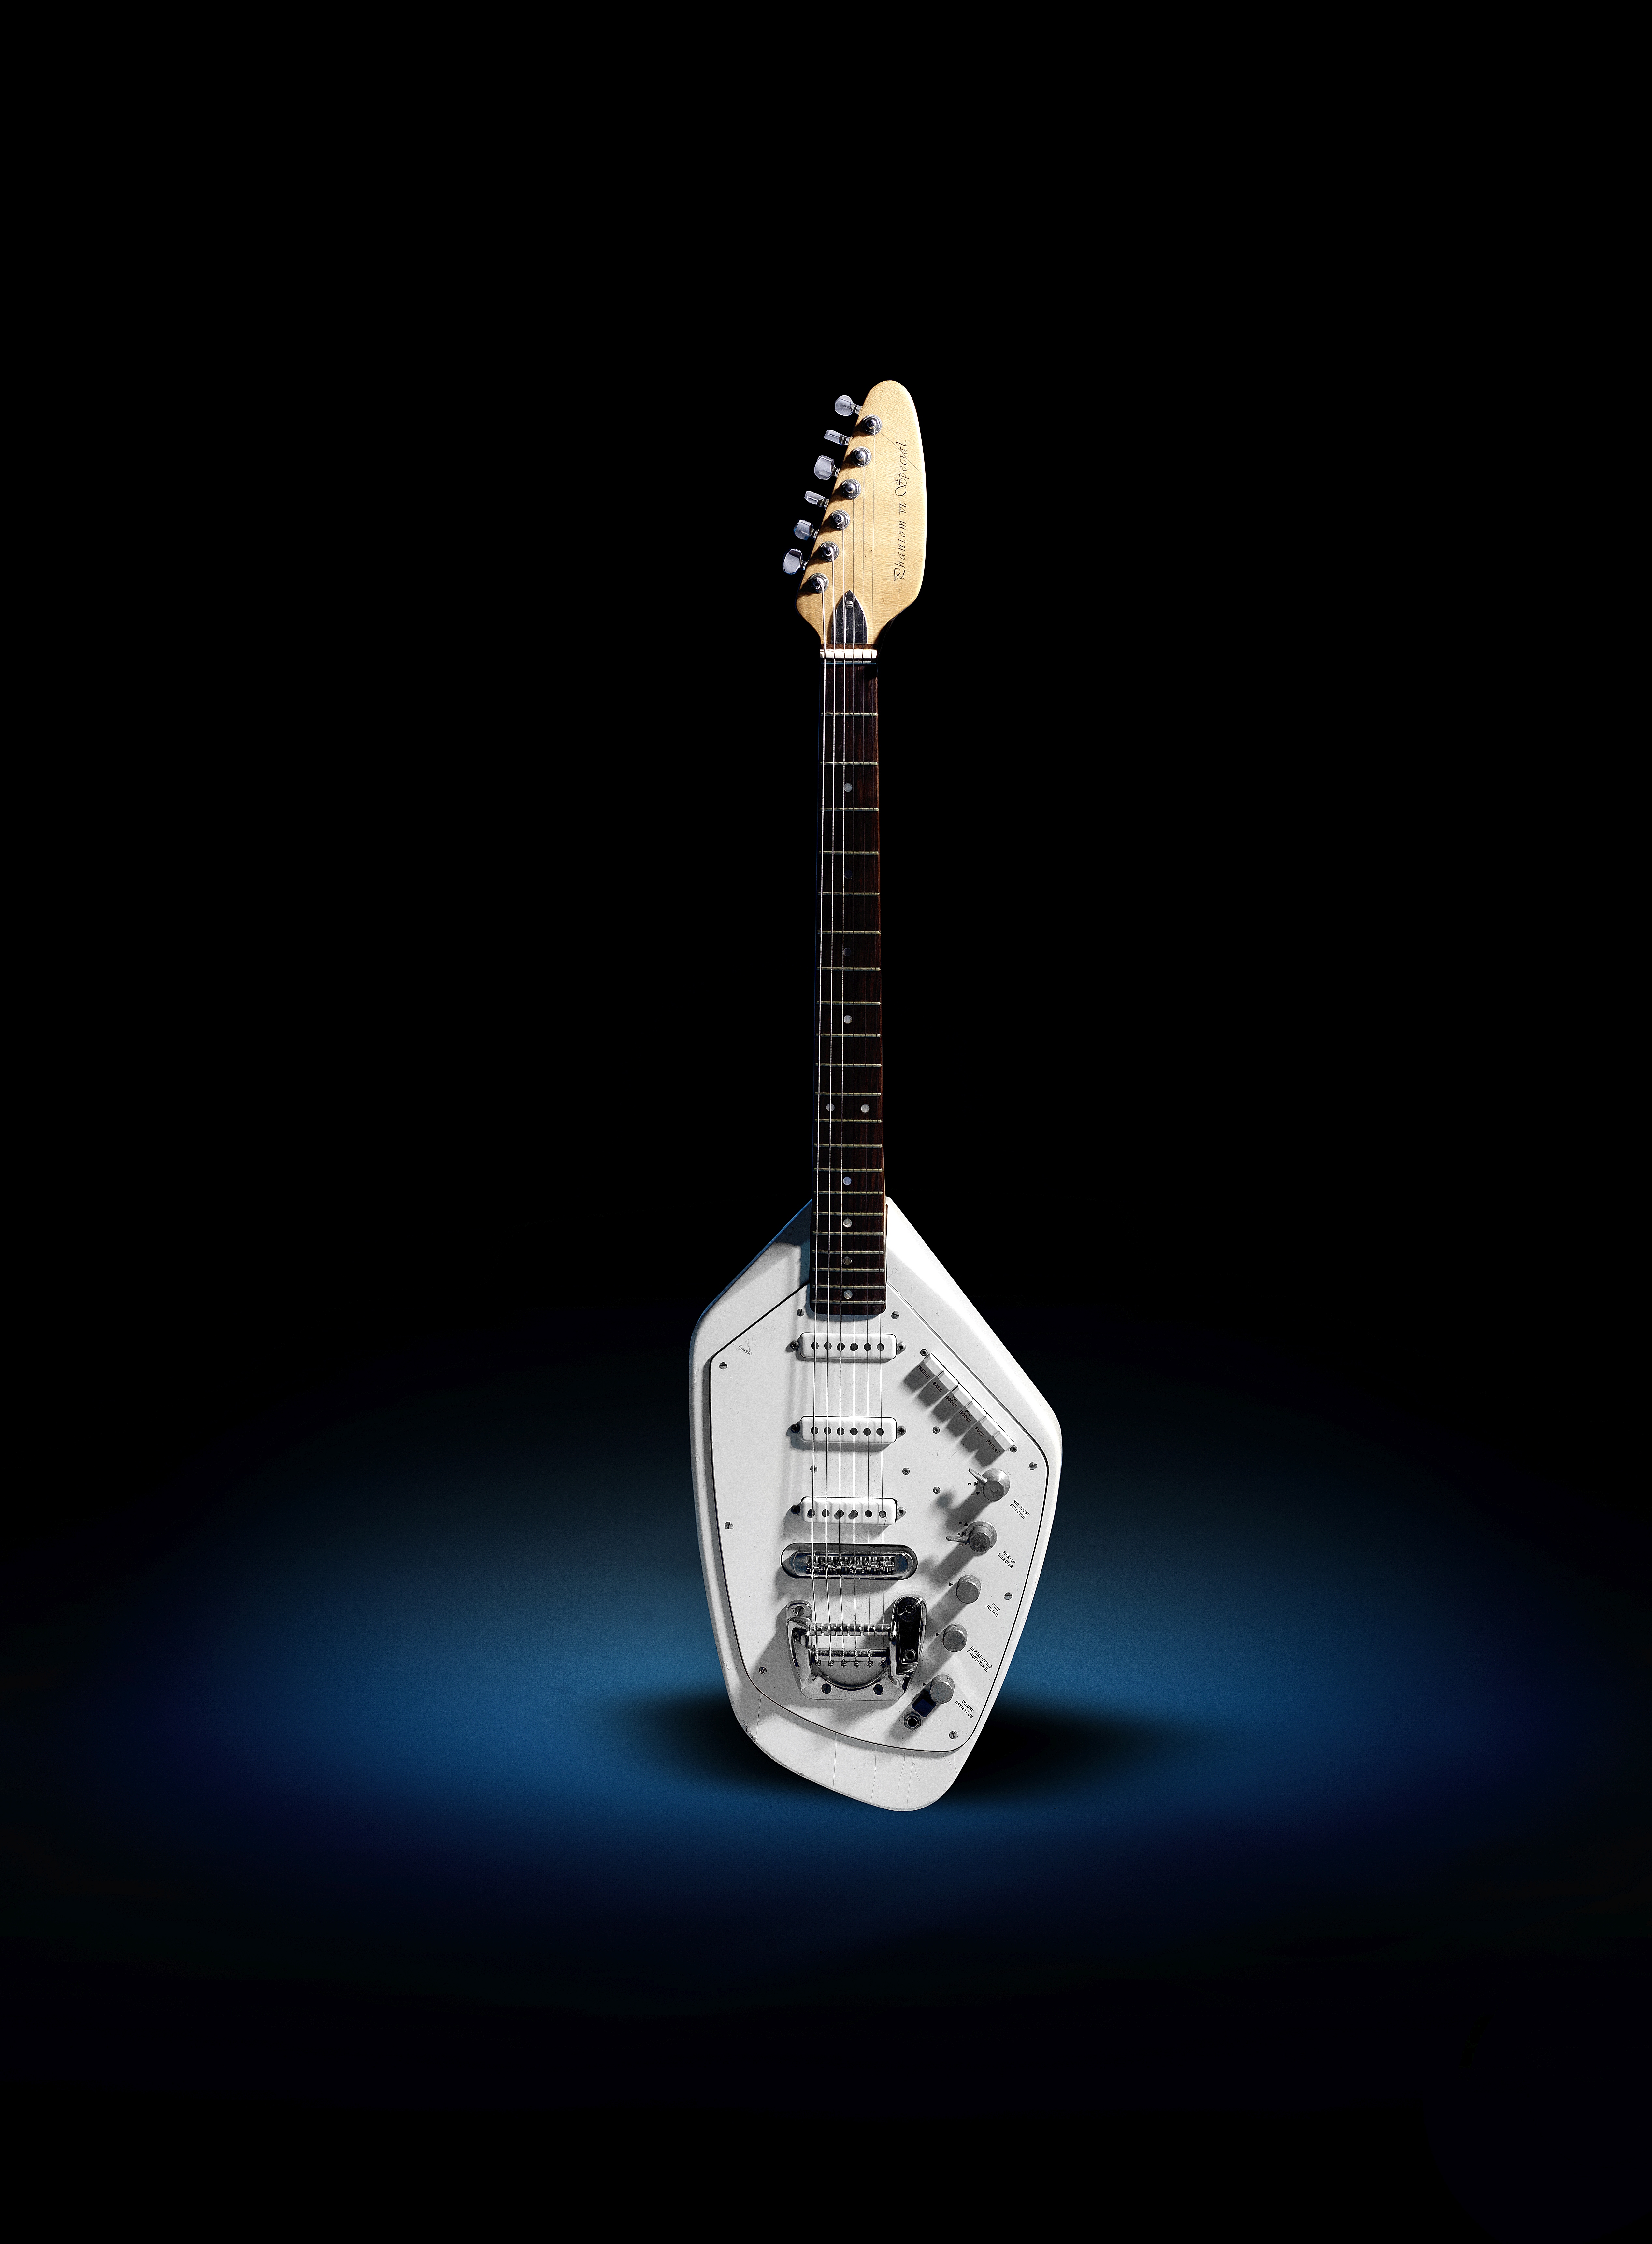 Joy Division: The Vox Phantom VI Special Guitar Owned By Ian Curtis And Played In The Video For '...